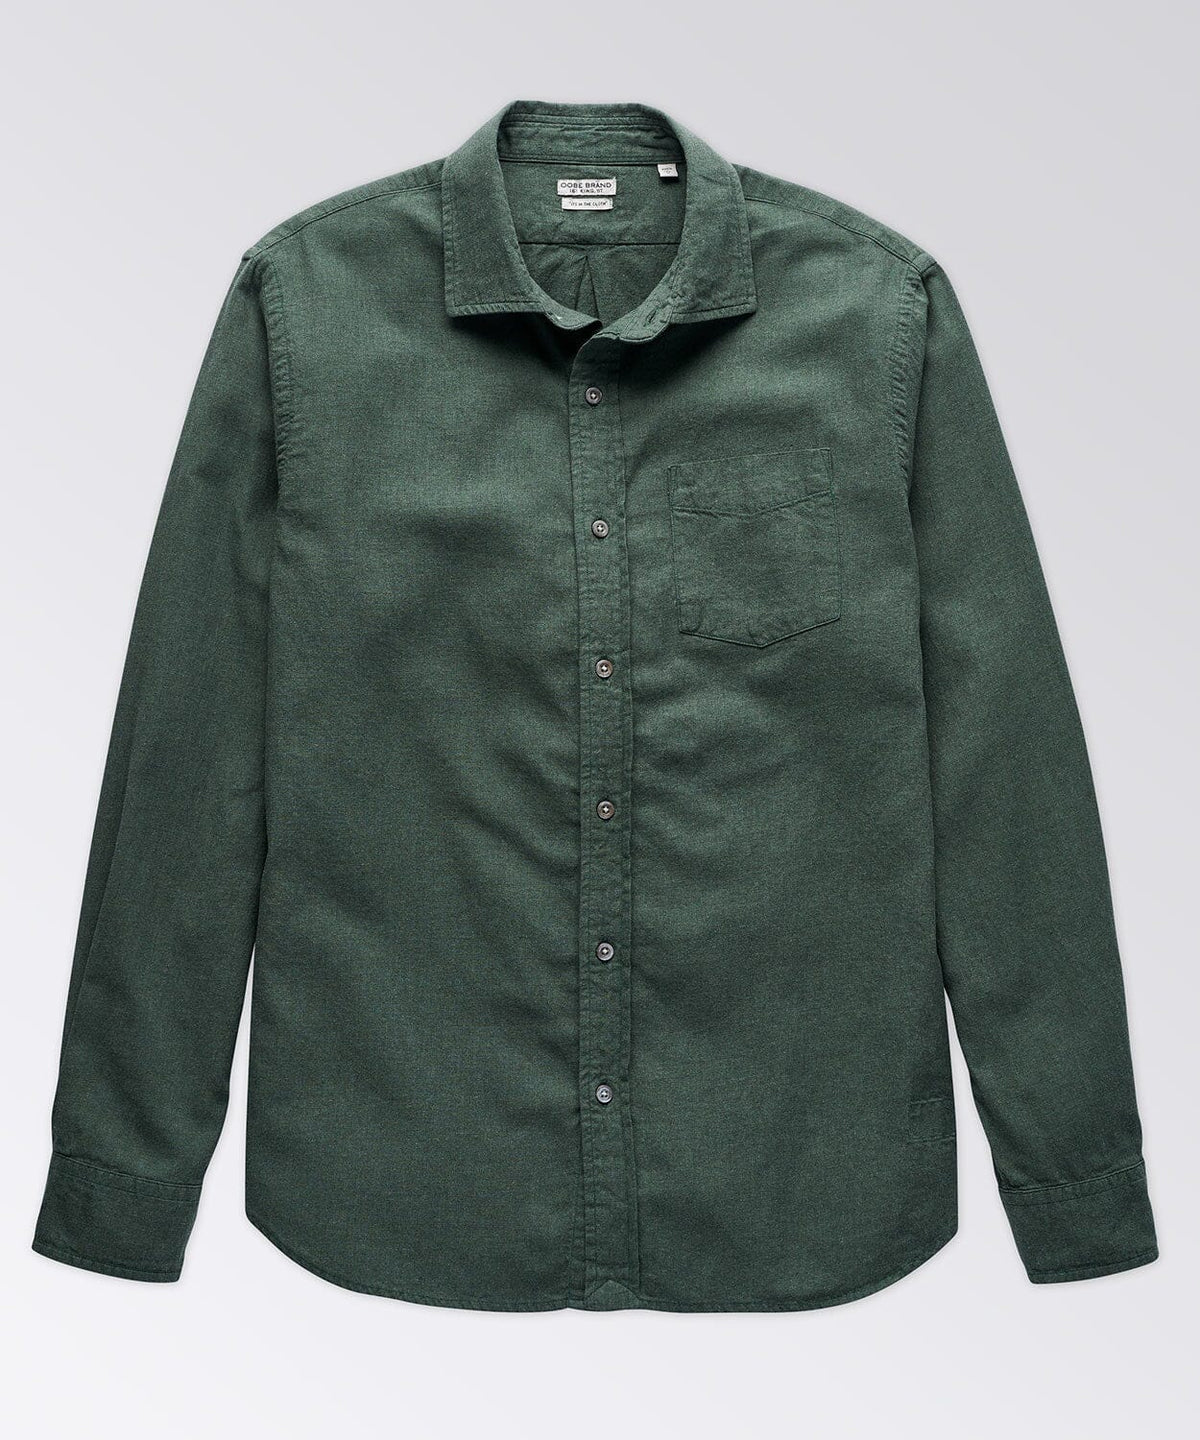 Excella Brushed Heather Twill Shirt